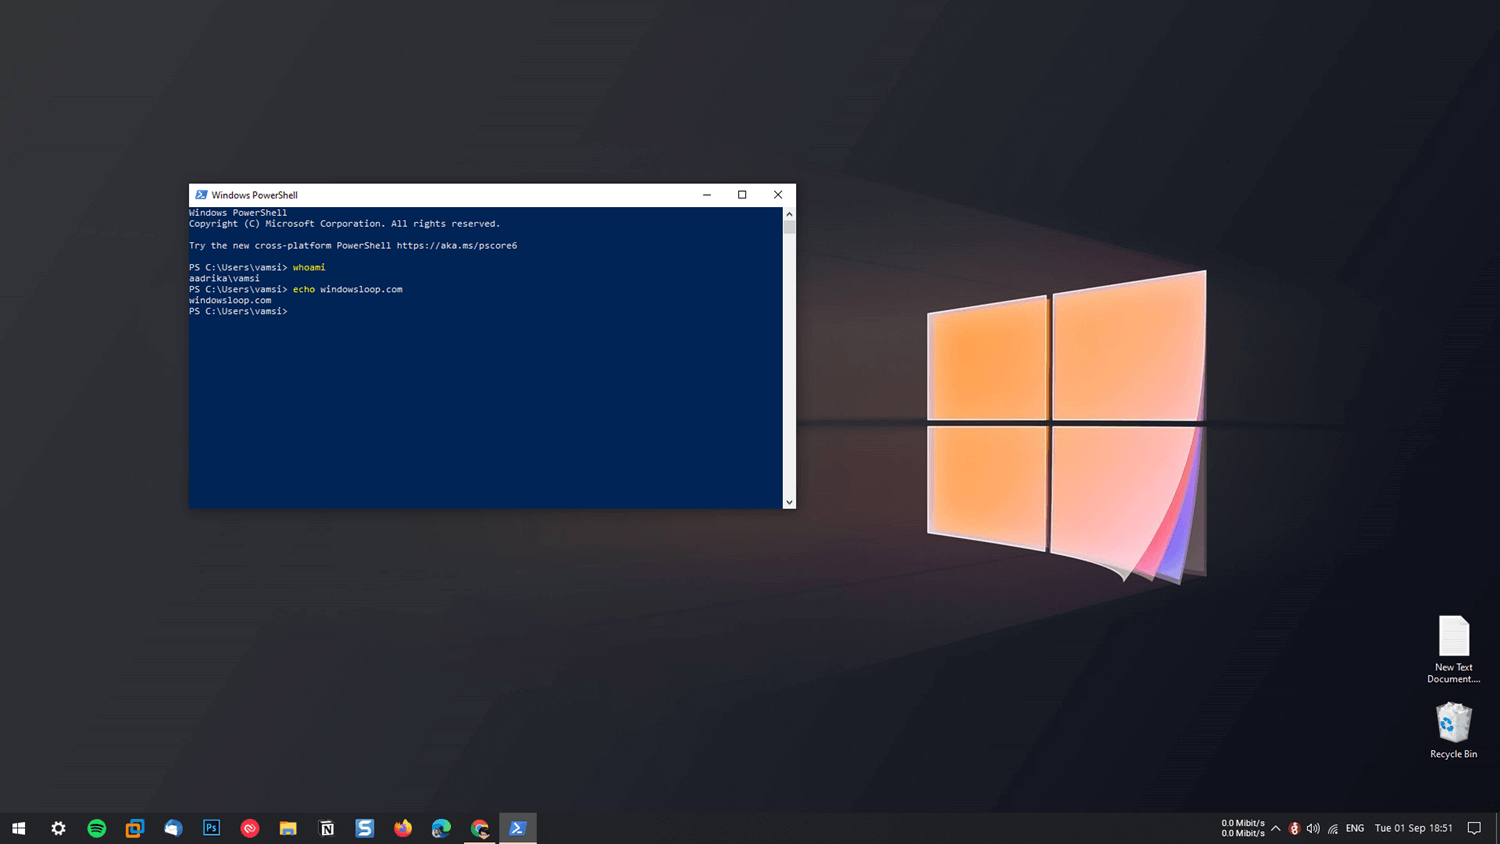 how to use powershell on windows 10